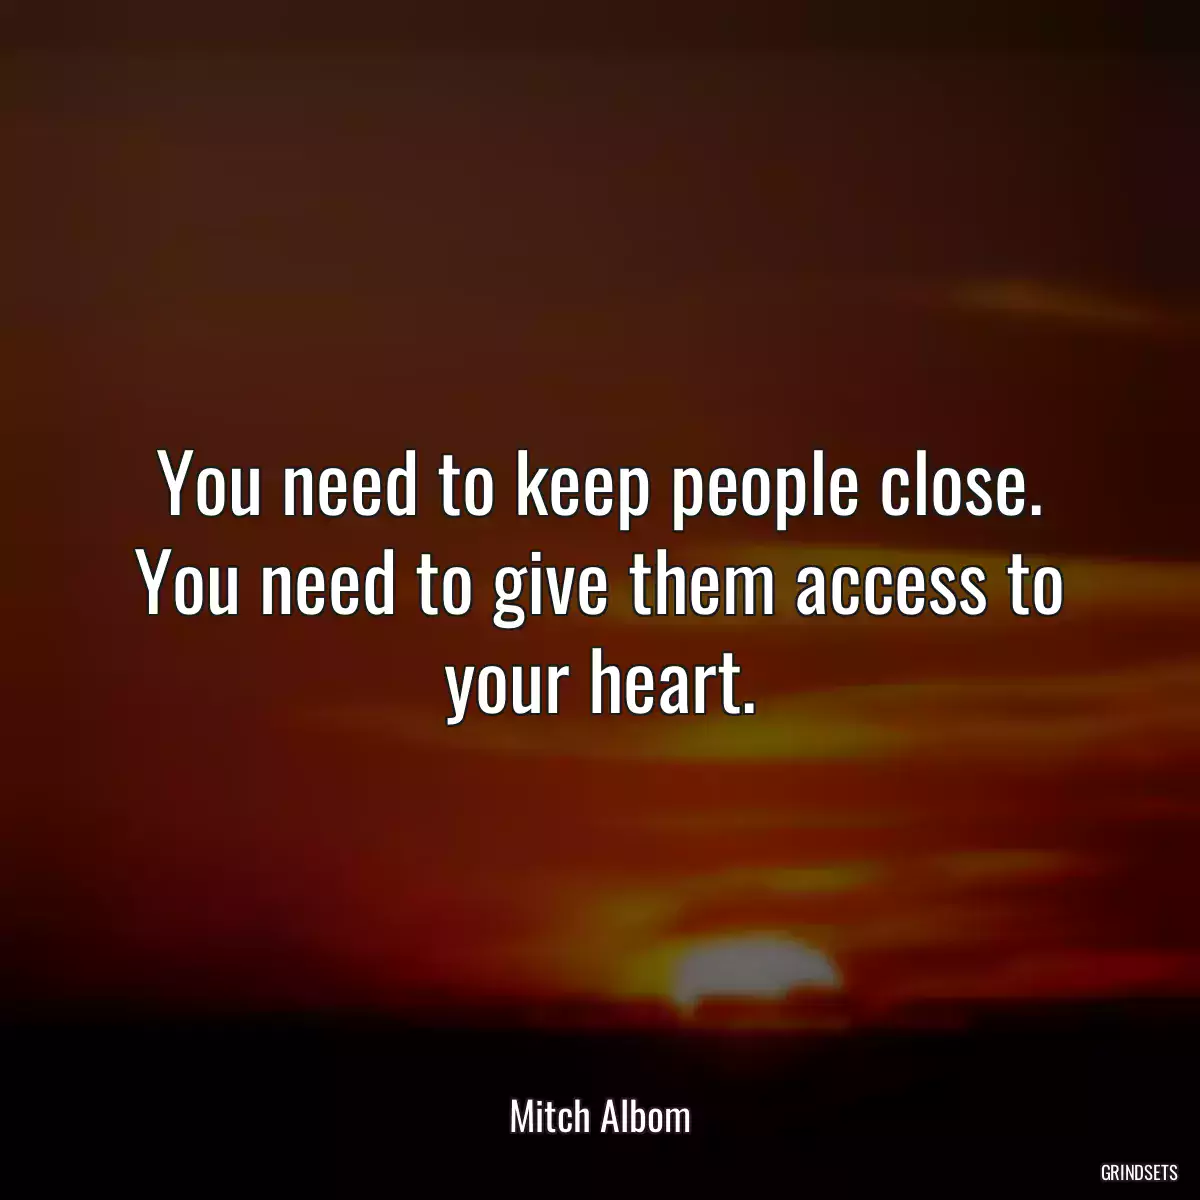 You need to keep people close. You need to give them access to your heart.